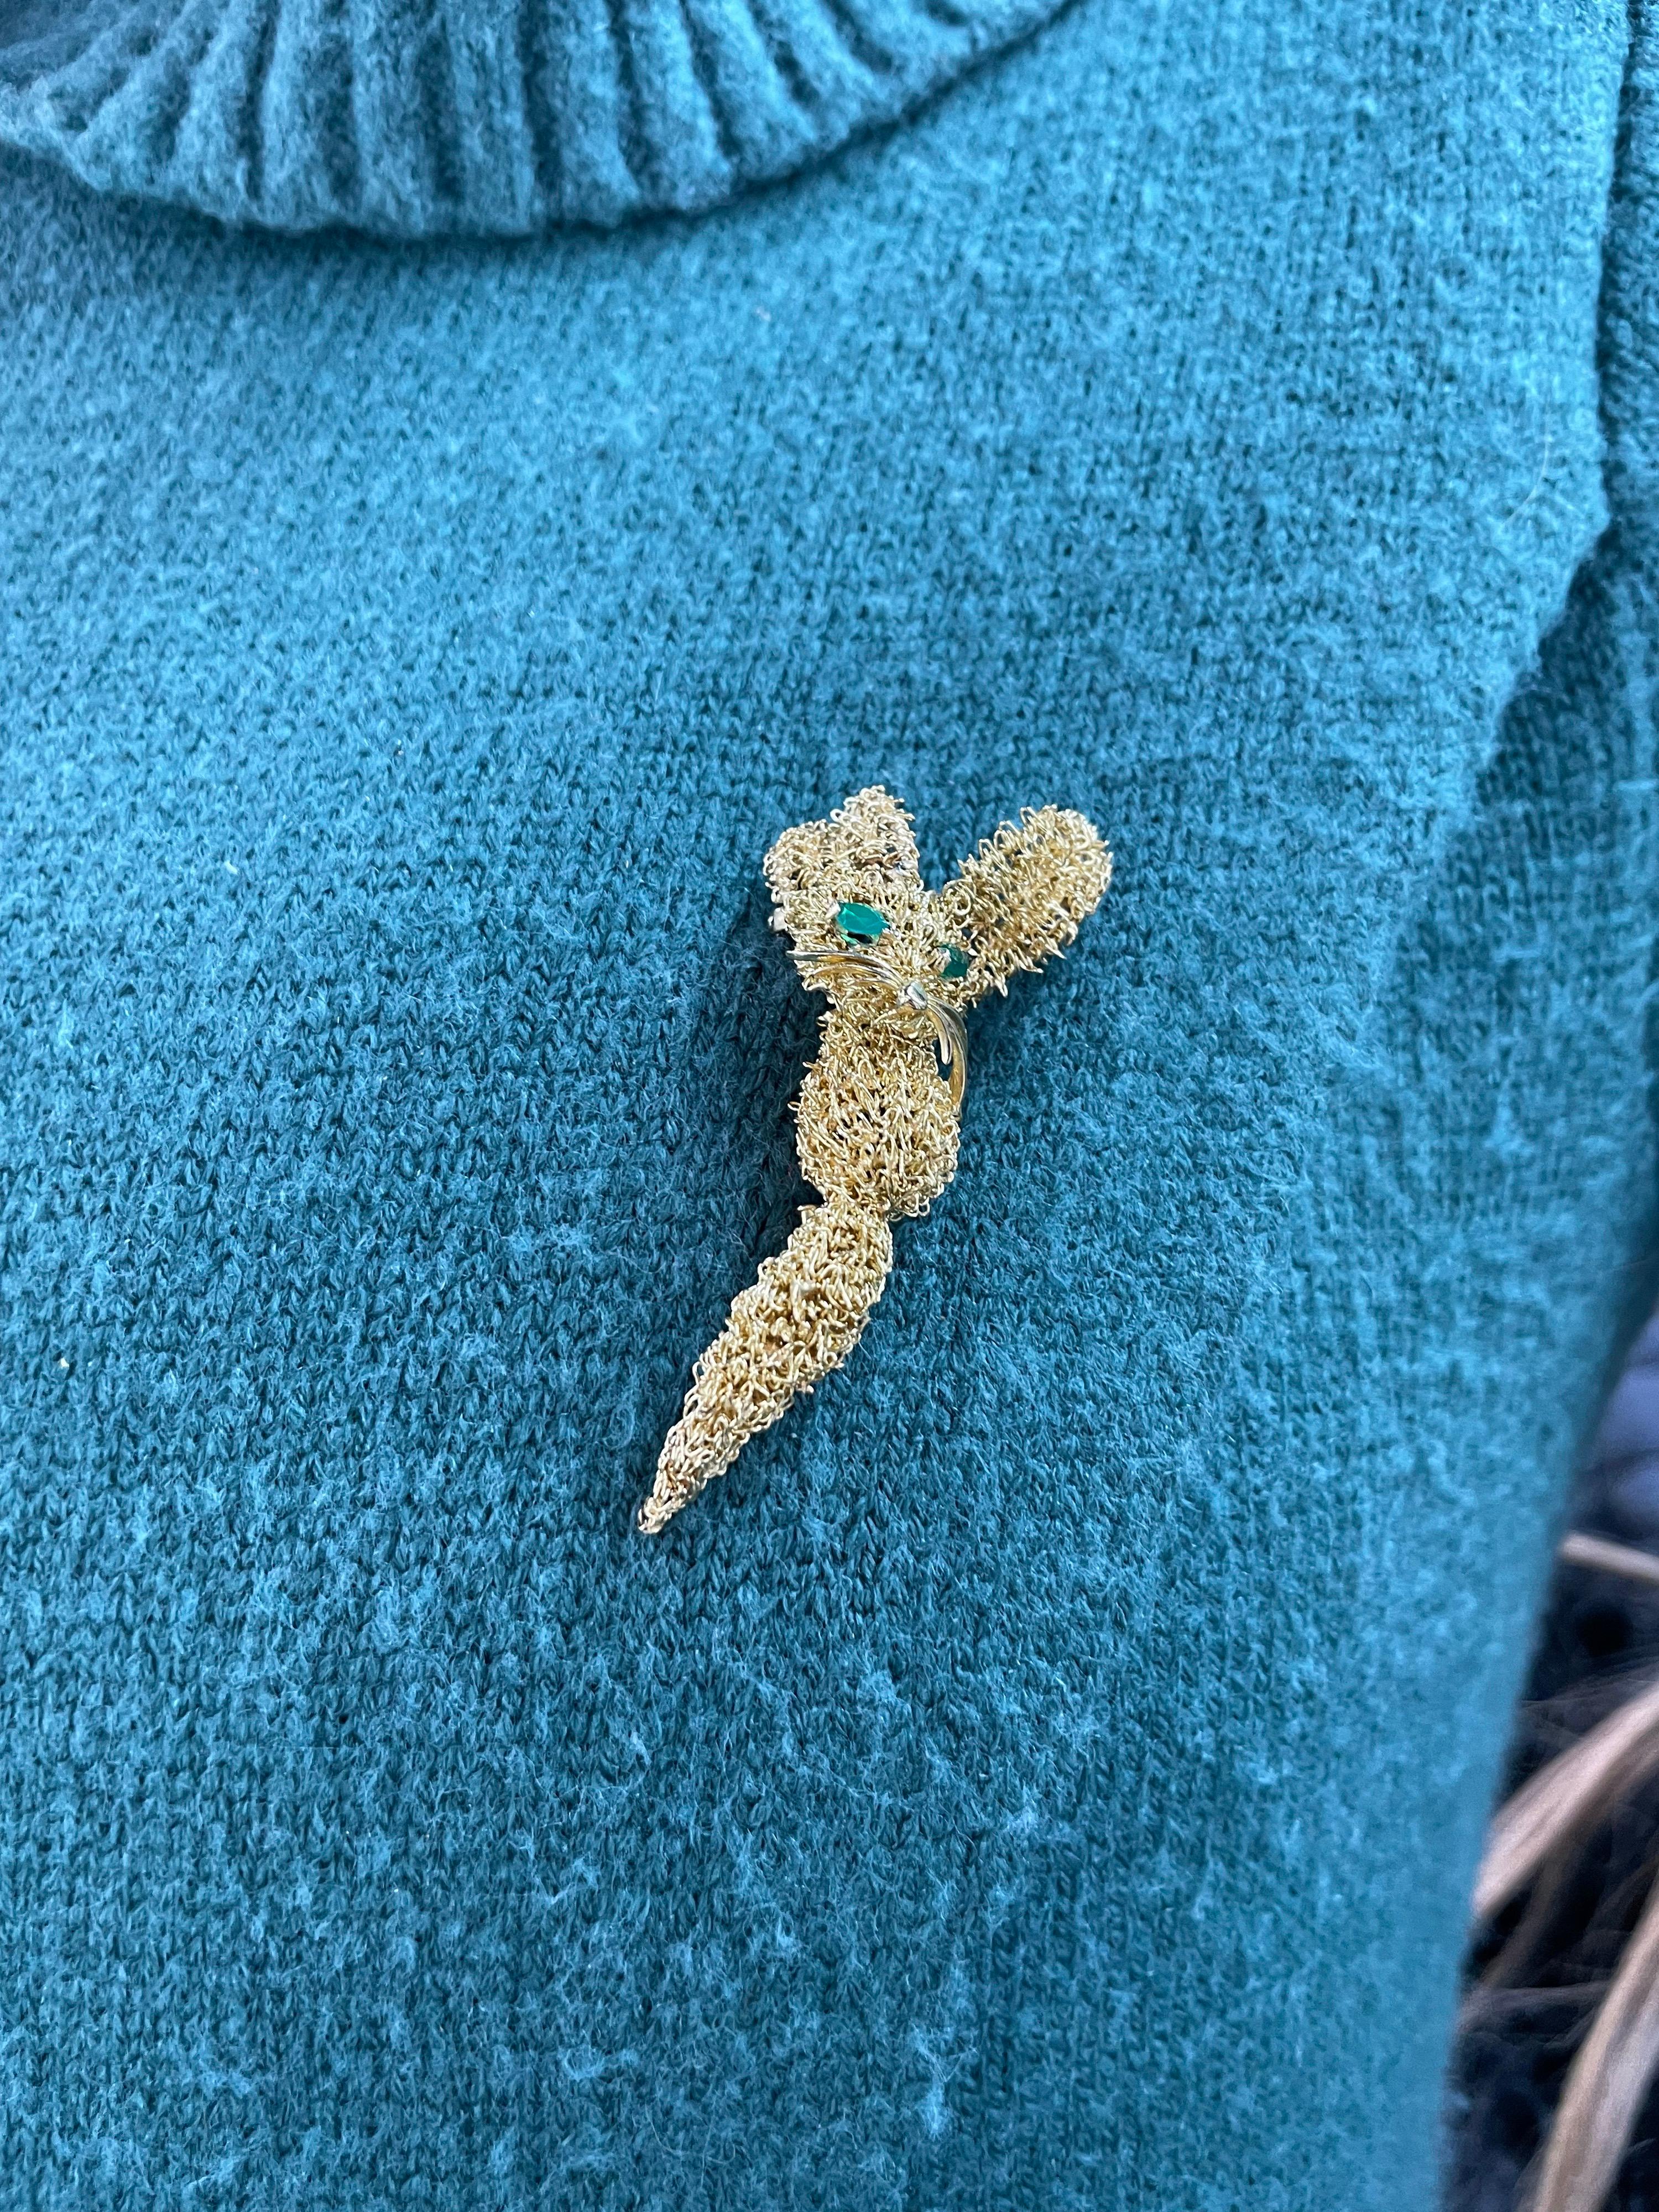 Van Cleef & Arpels Emerald Gold Fox Pin Made in France 18K 7